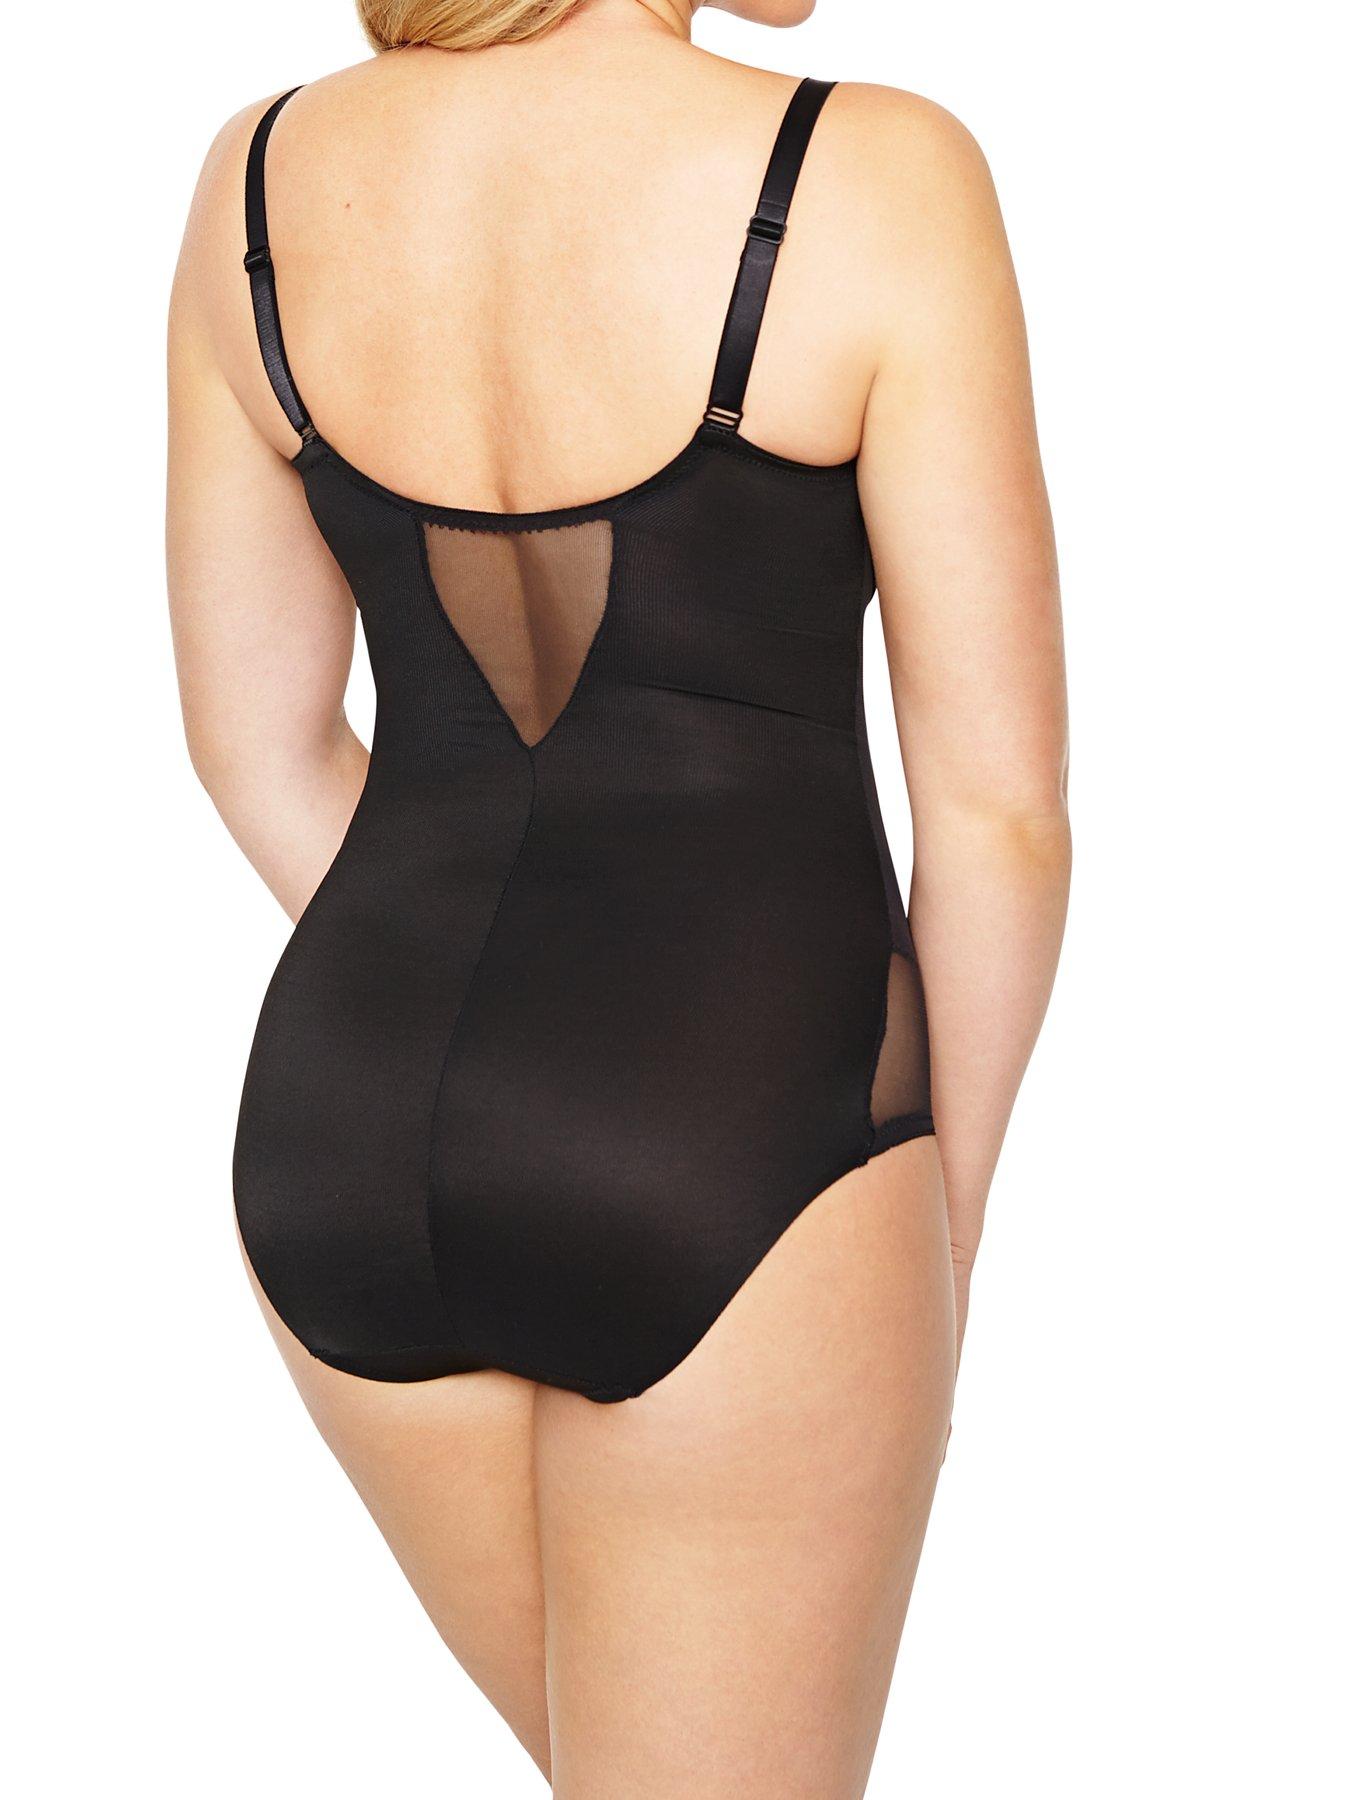 Miraclesuit Womens Sexy Sheer Extra Firm Control Bodysuit Style-2783 